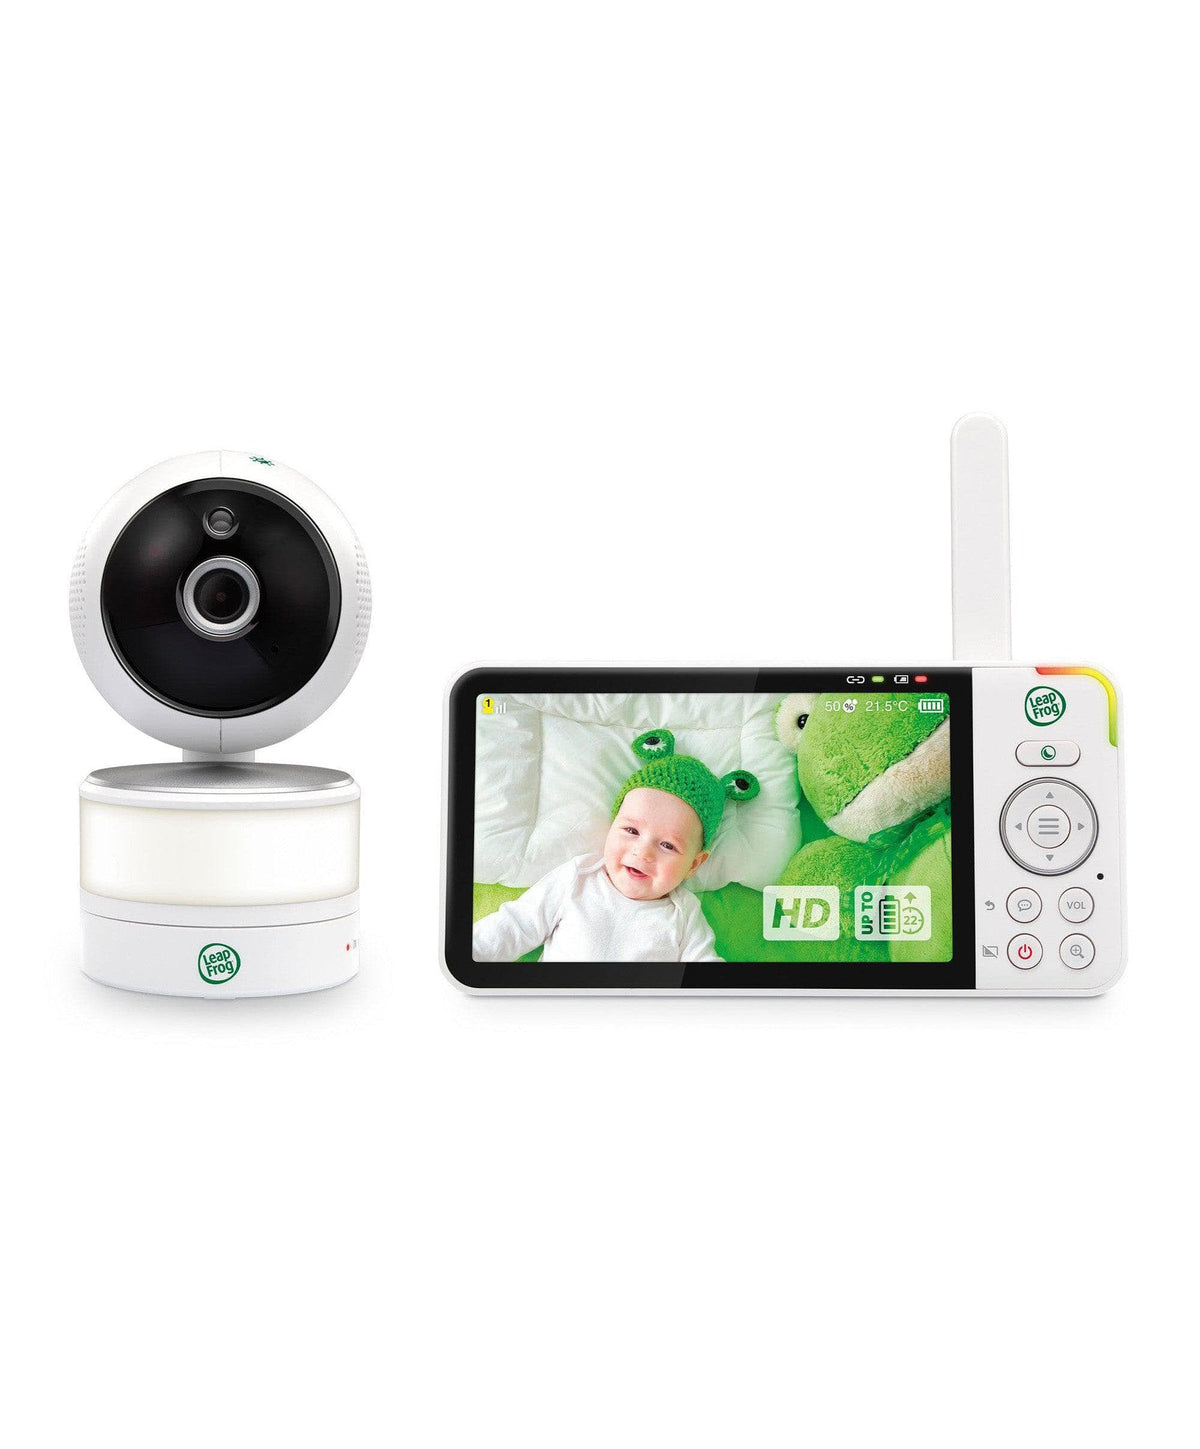 Babymoov Surveillance - Yoo Roll » New Products Every Day